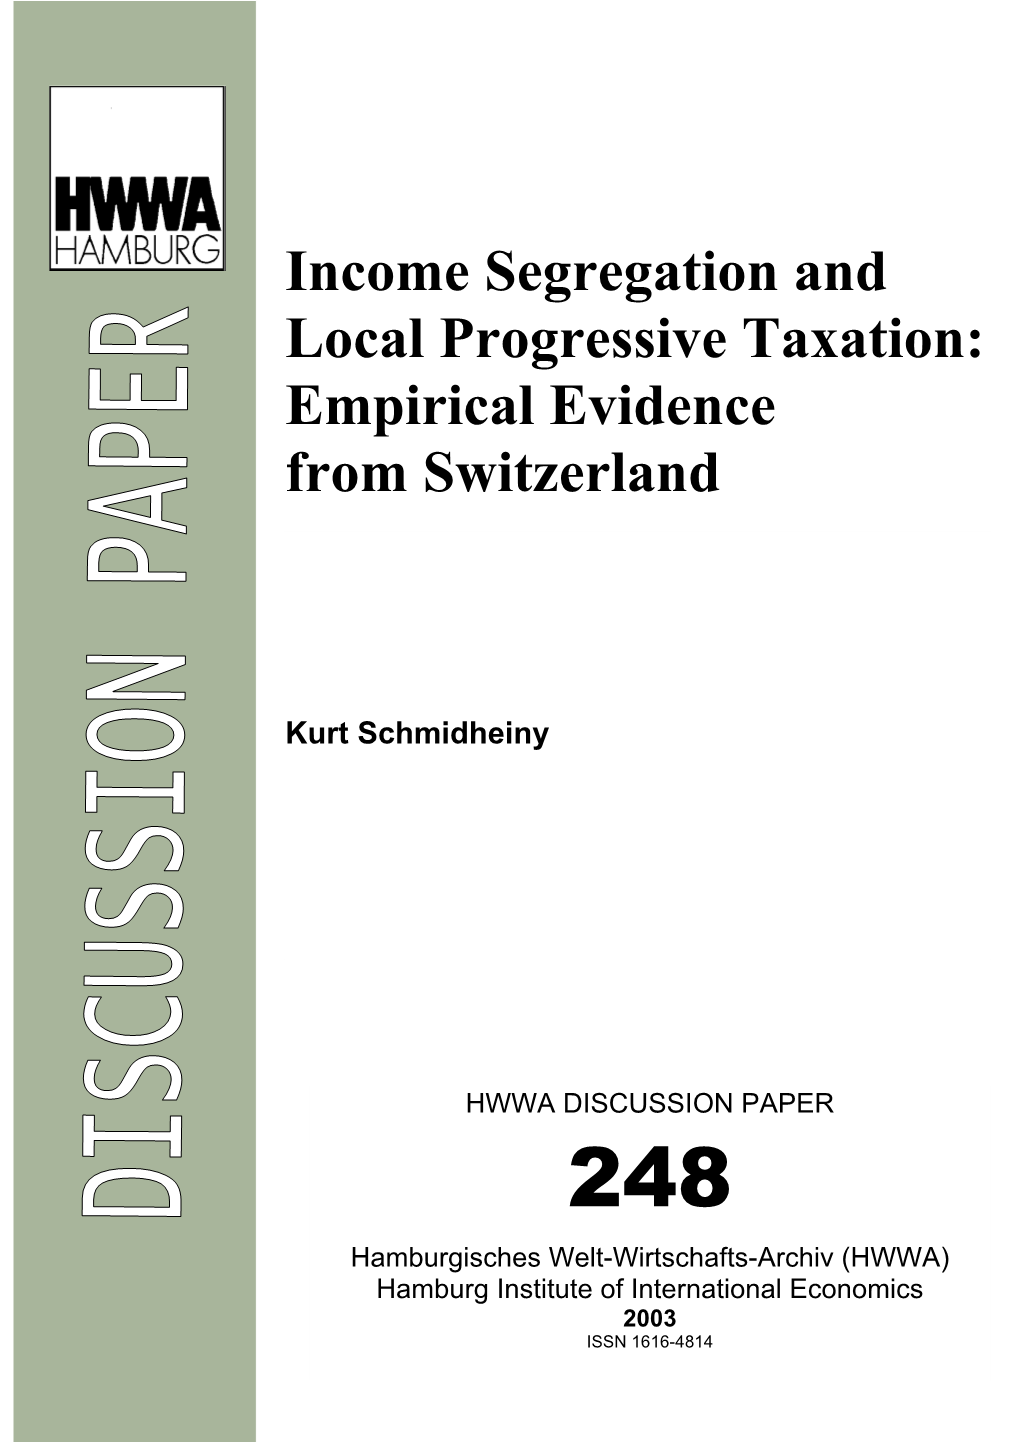 Income Segregation and Local Progressive Taxation: Empirical Evidence from Switzerland